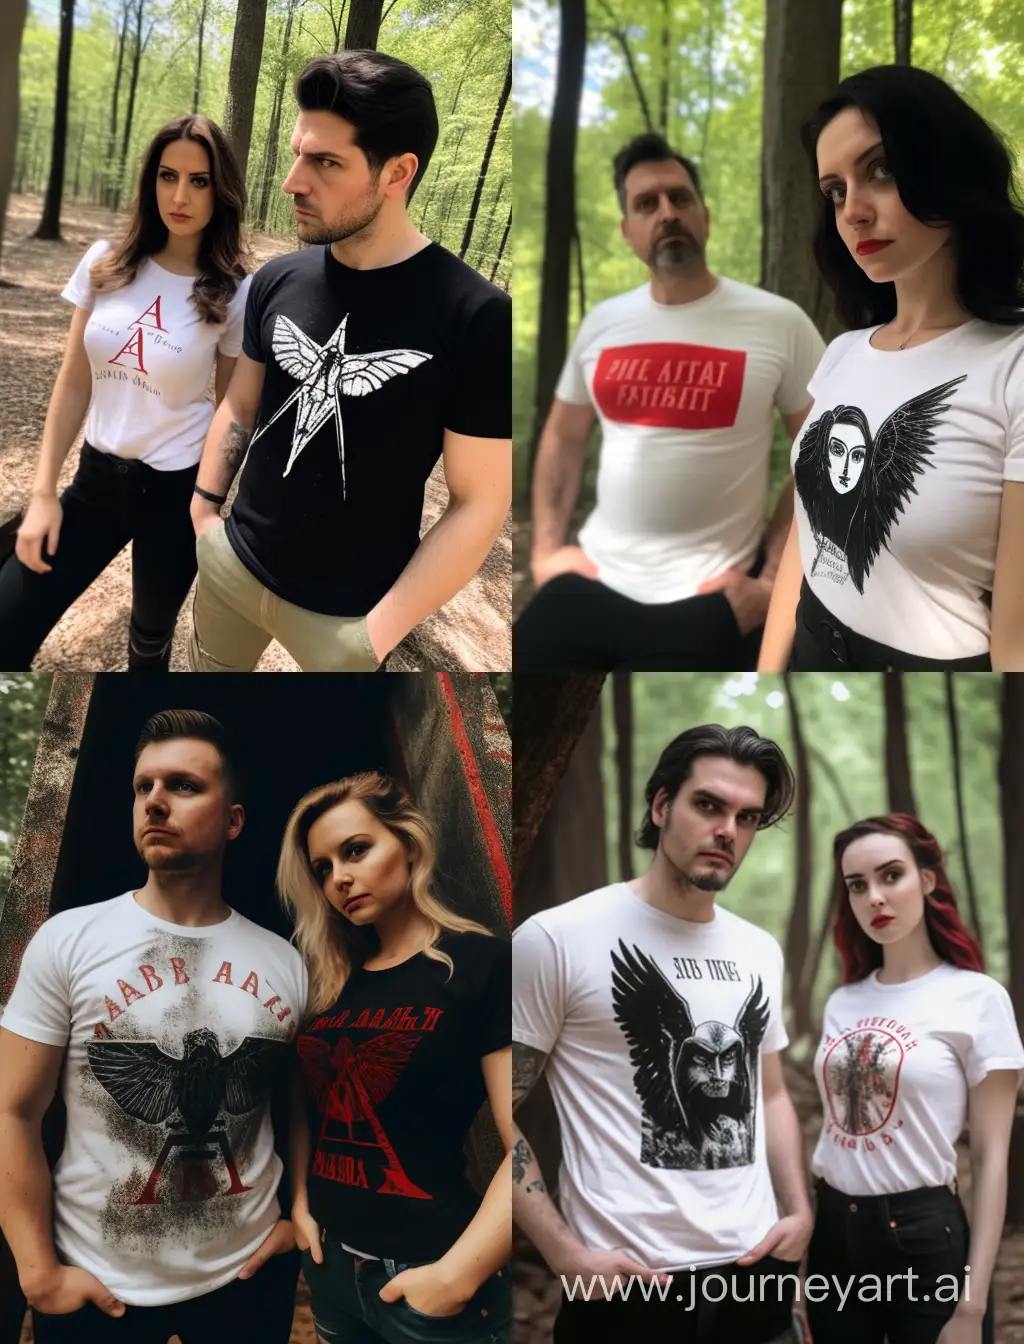 A man wearing a white and black t-shirt with the letter a written on it and a girl wearing a white and black t-shirt with a letter written on it are now in a world of stories and horror and many wings and red eyes in a forest and a star